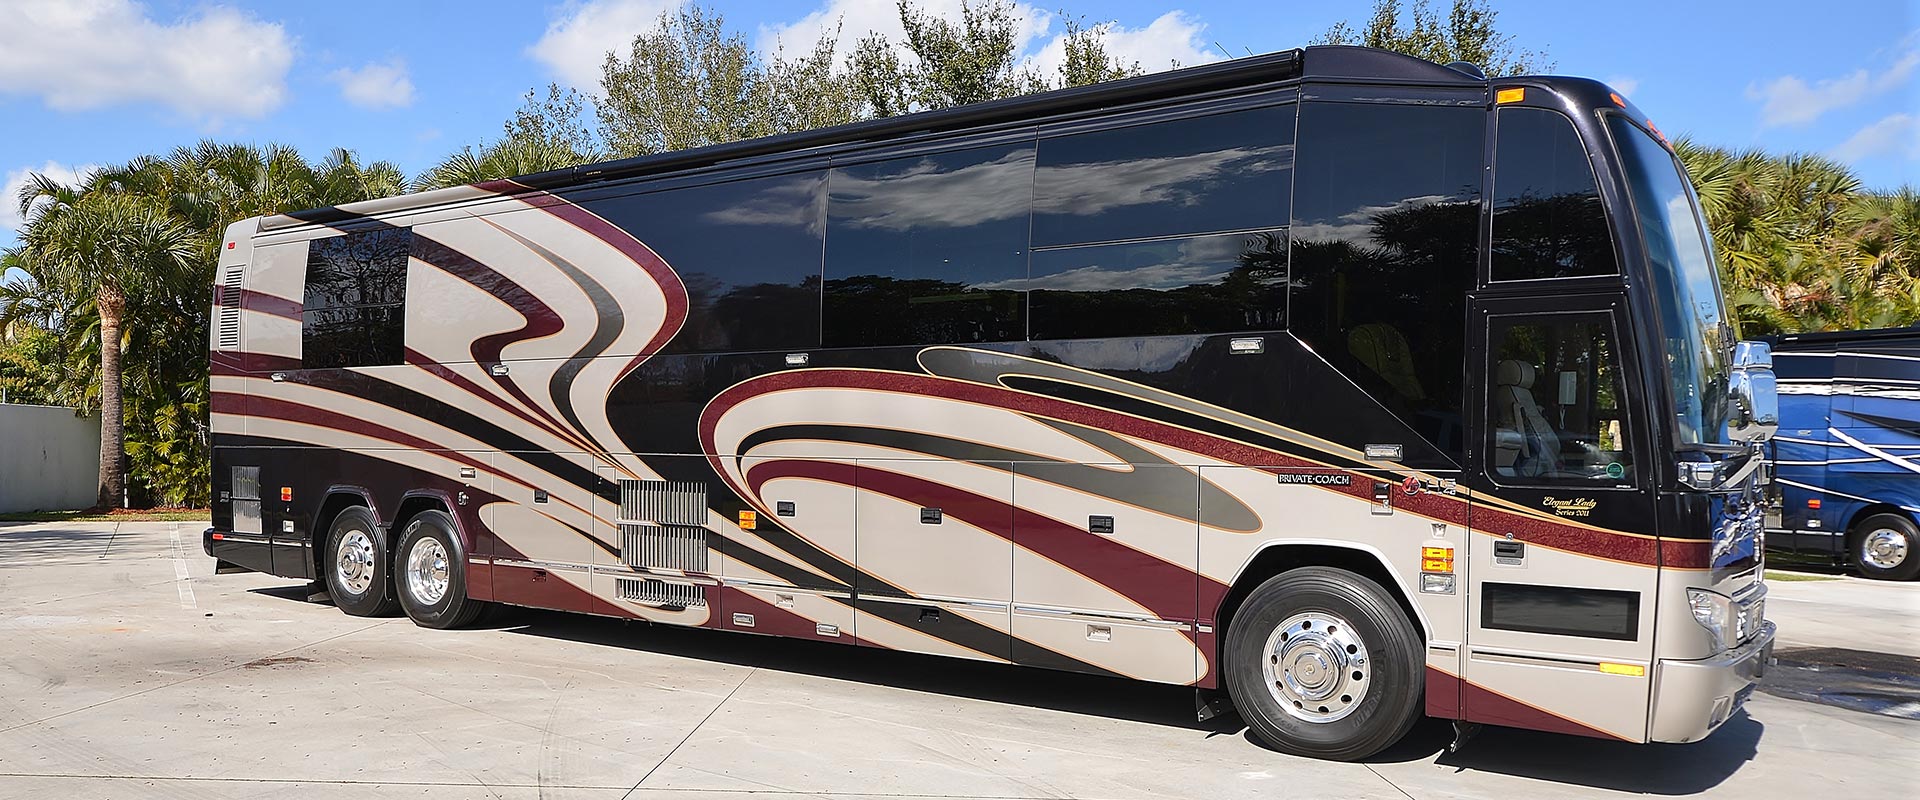 2011 Liberty Coach #858-B Exterior Motorcoach in the lot